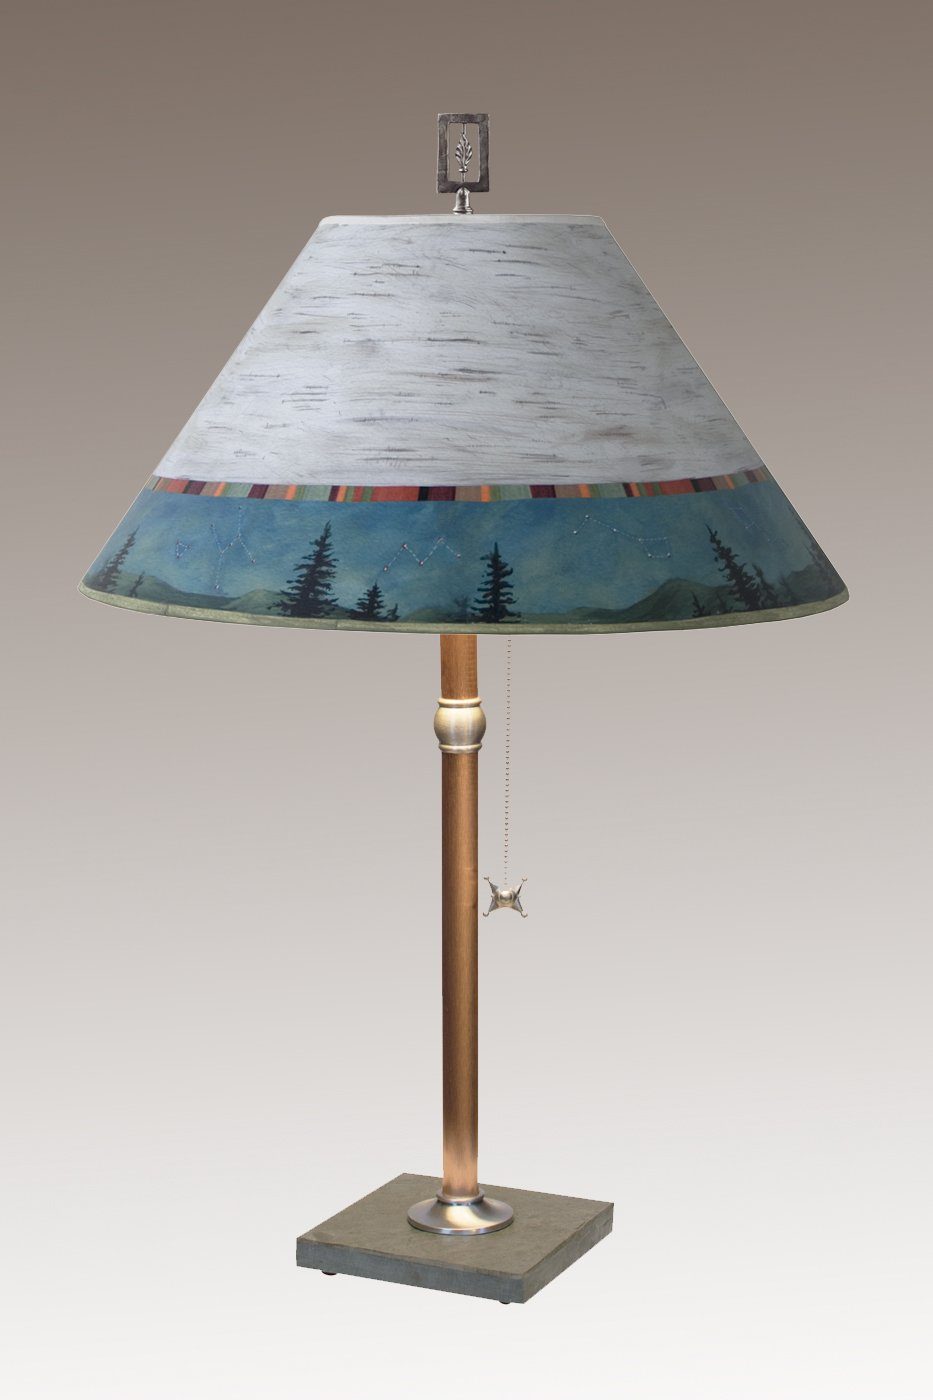 Copper Table Lamp with Large Conical Shade in Birch Midnight